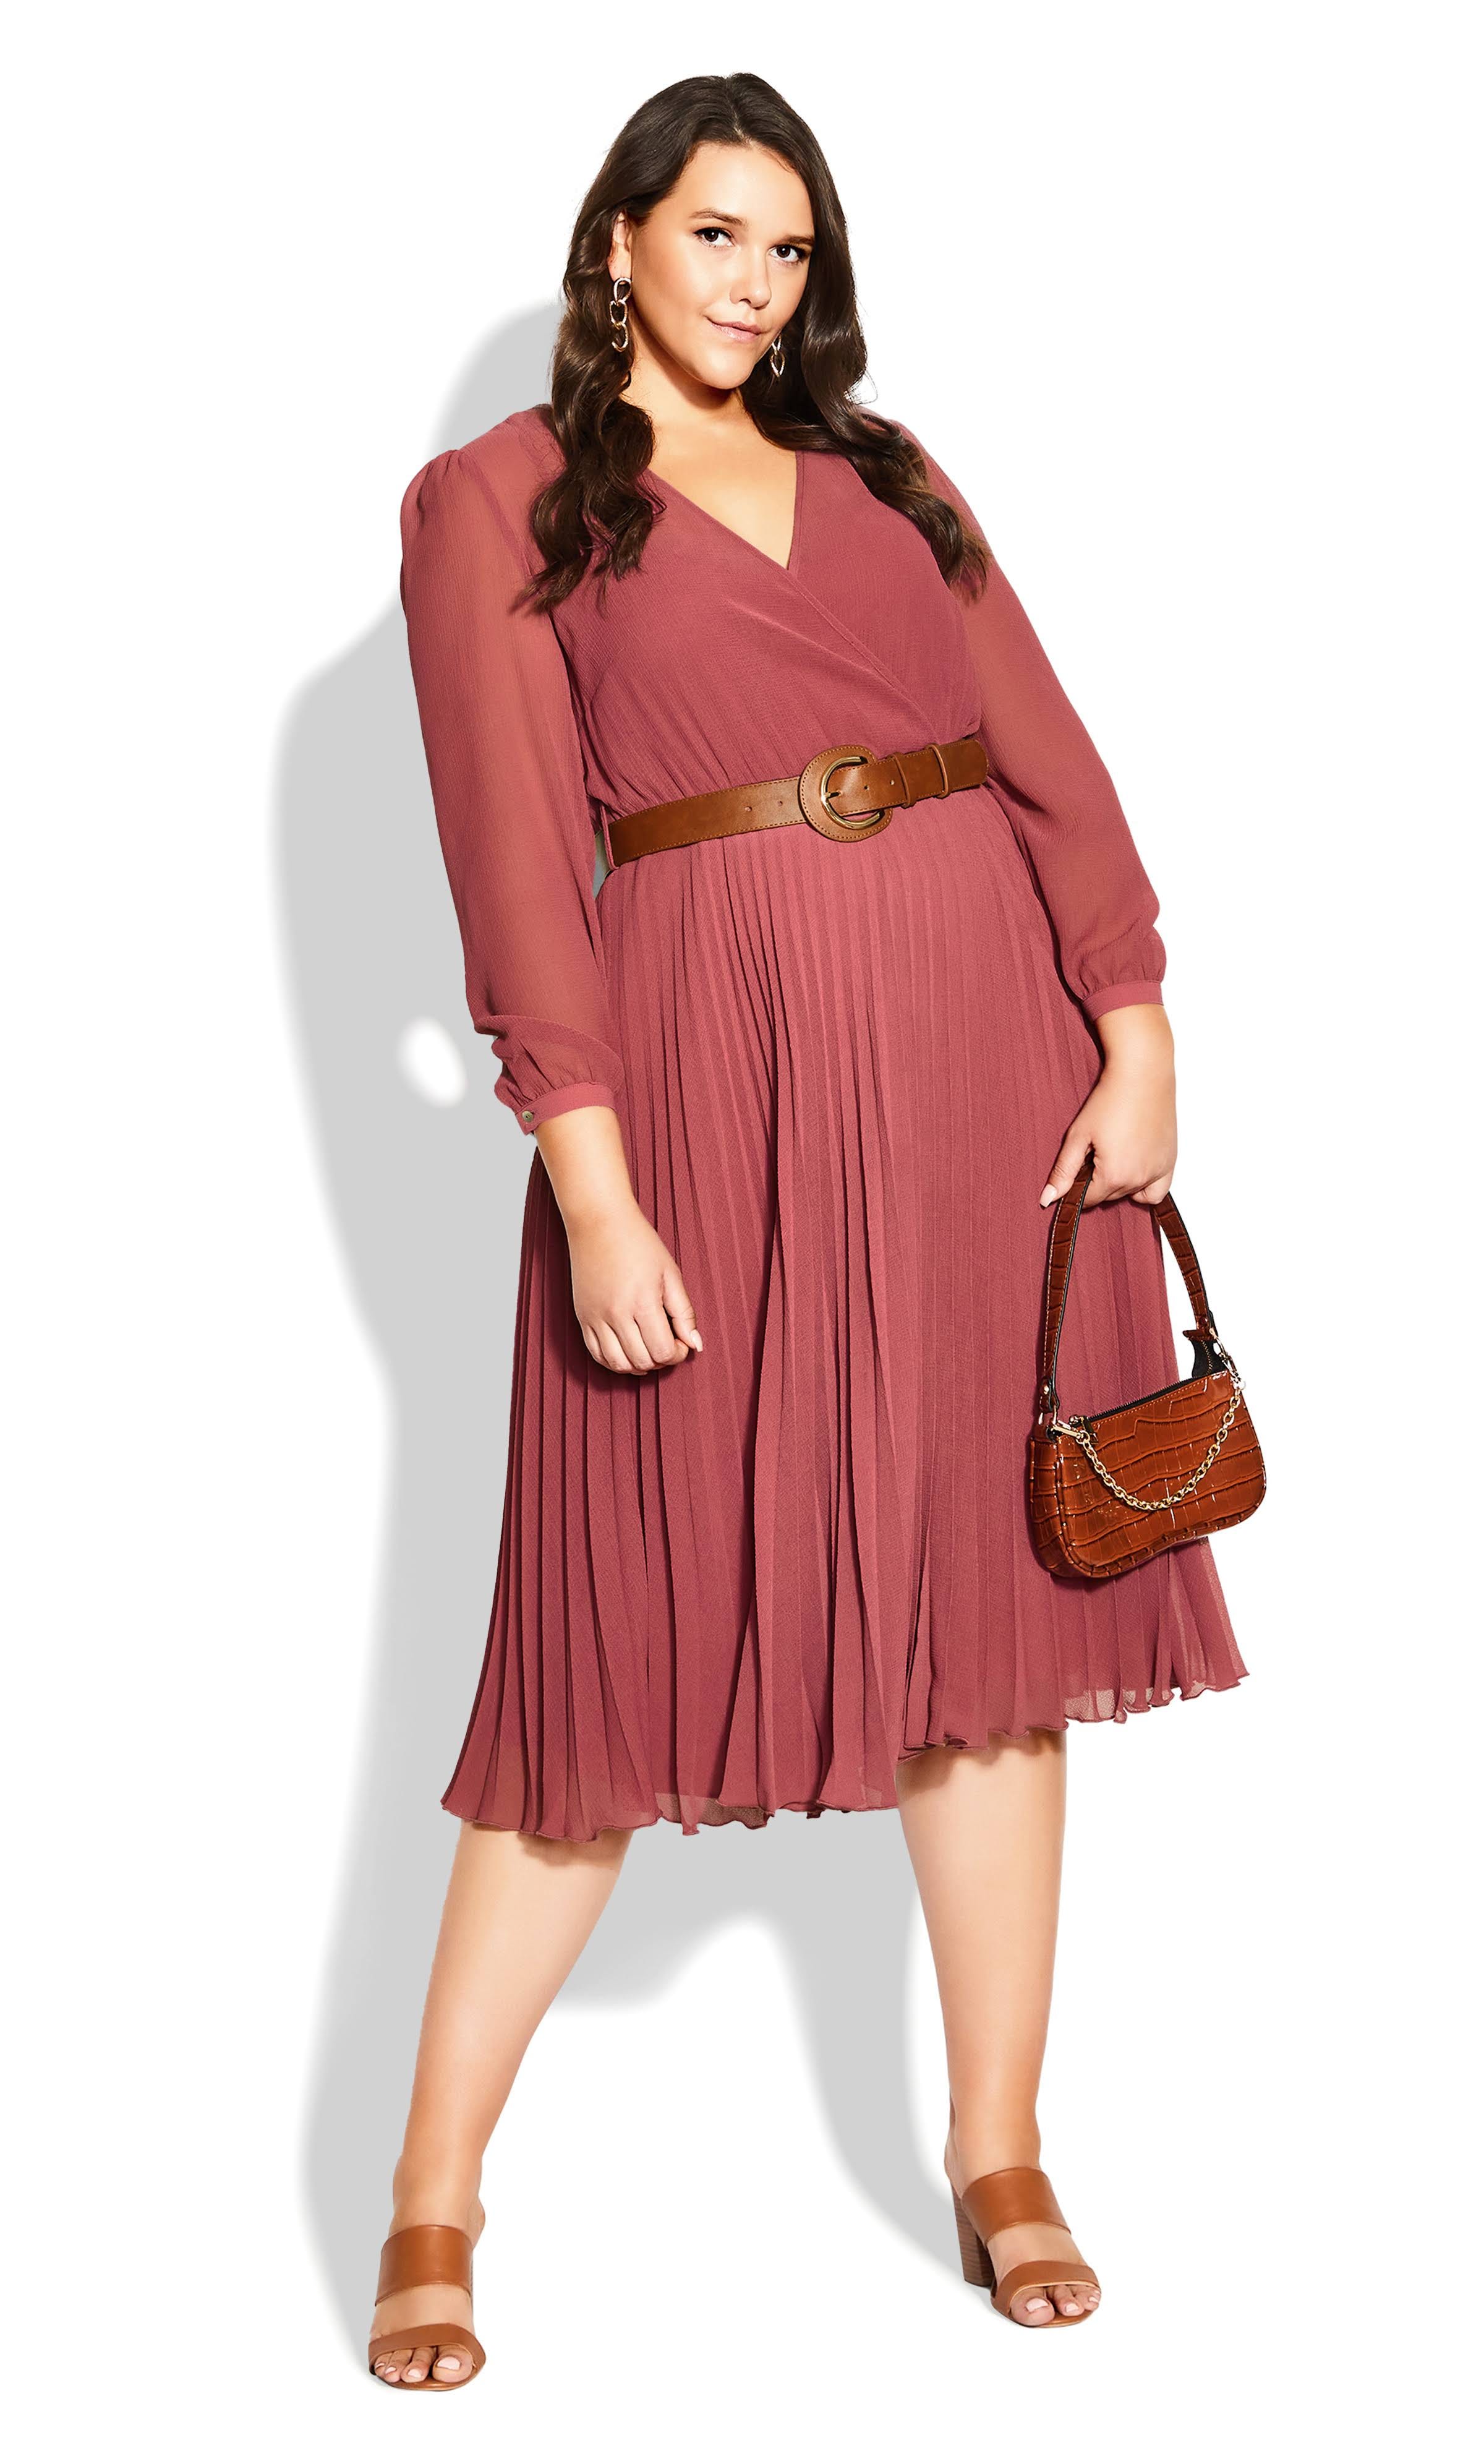 Stunning Plus Size Precious Pleat Dress for Date Night | Image